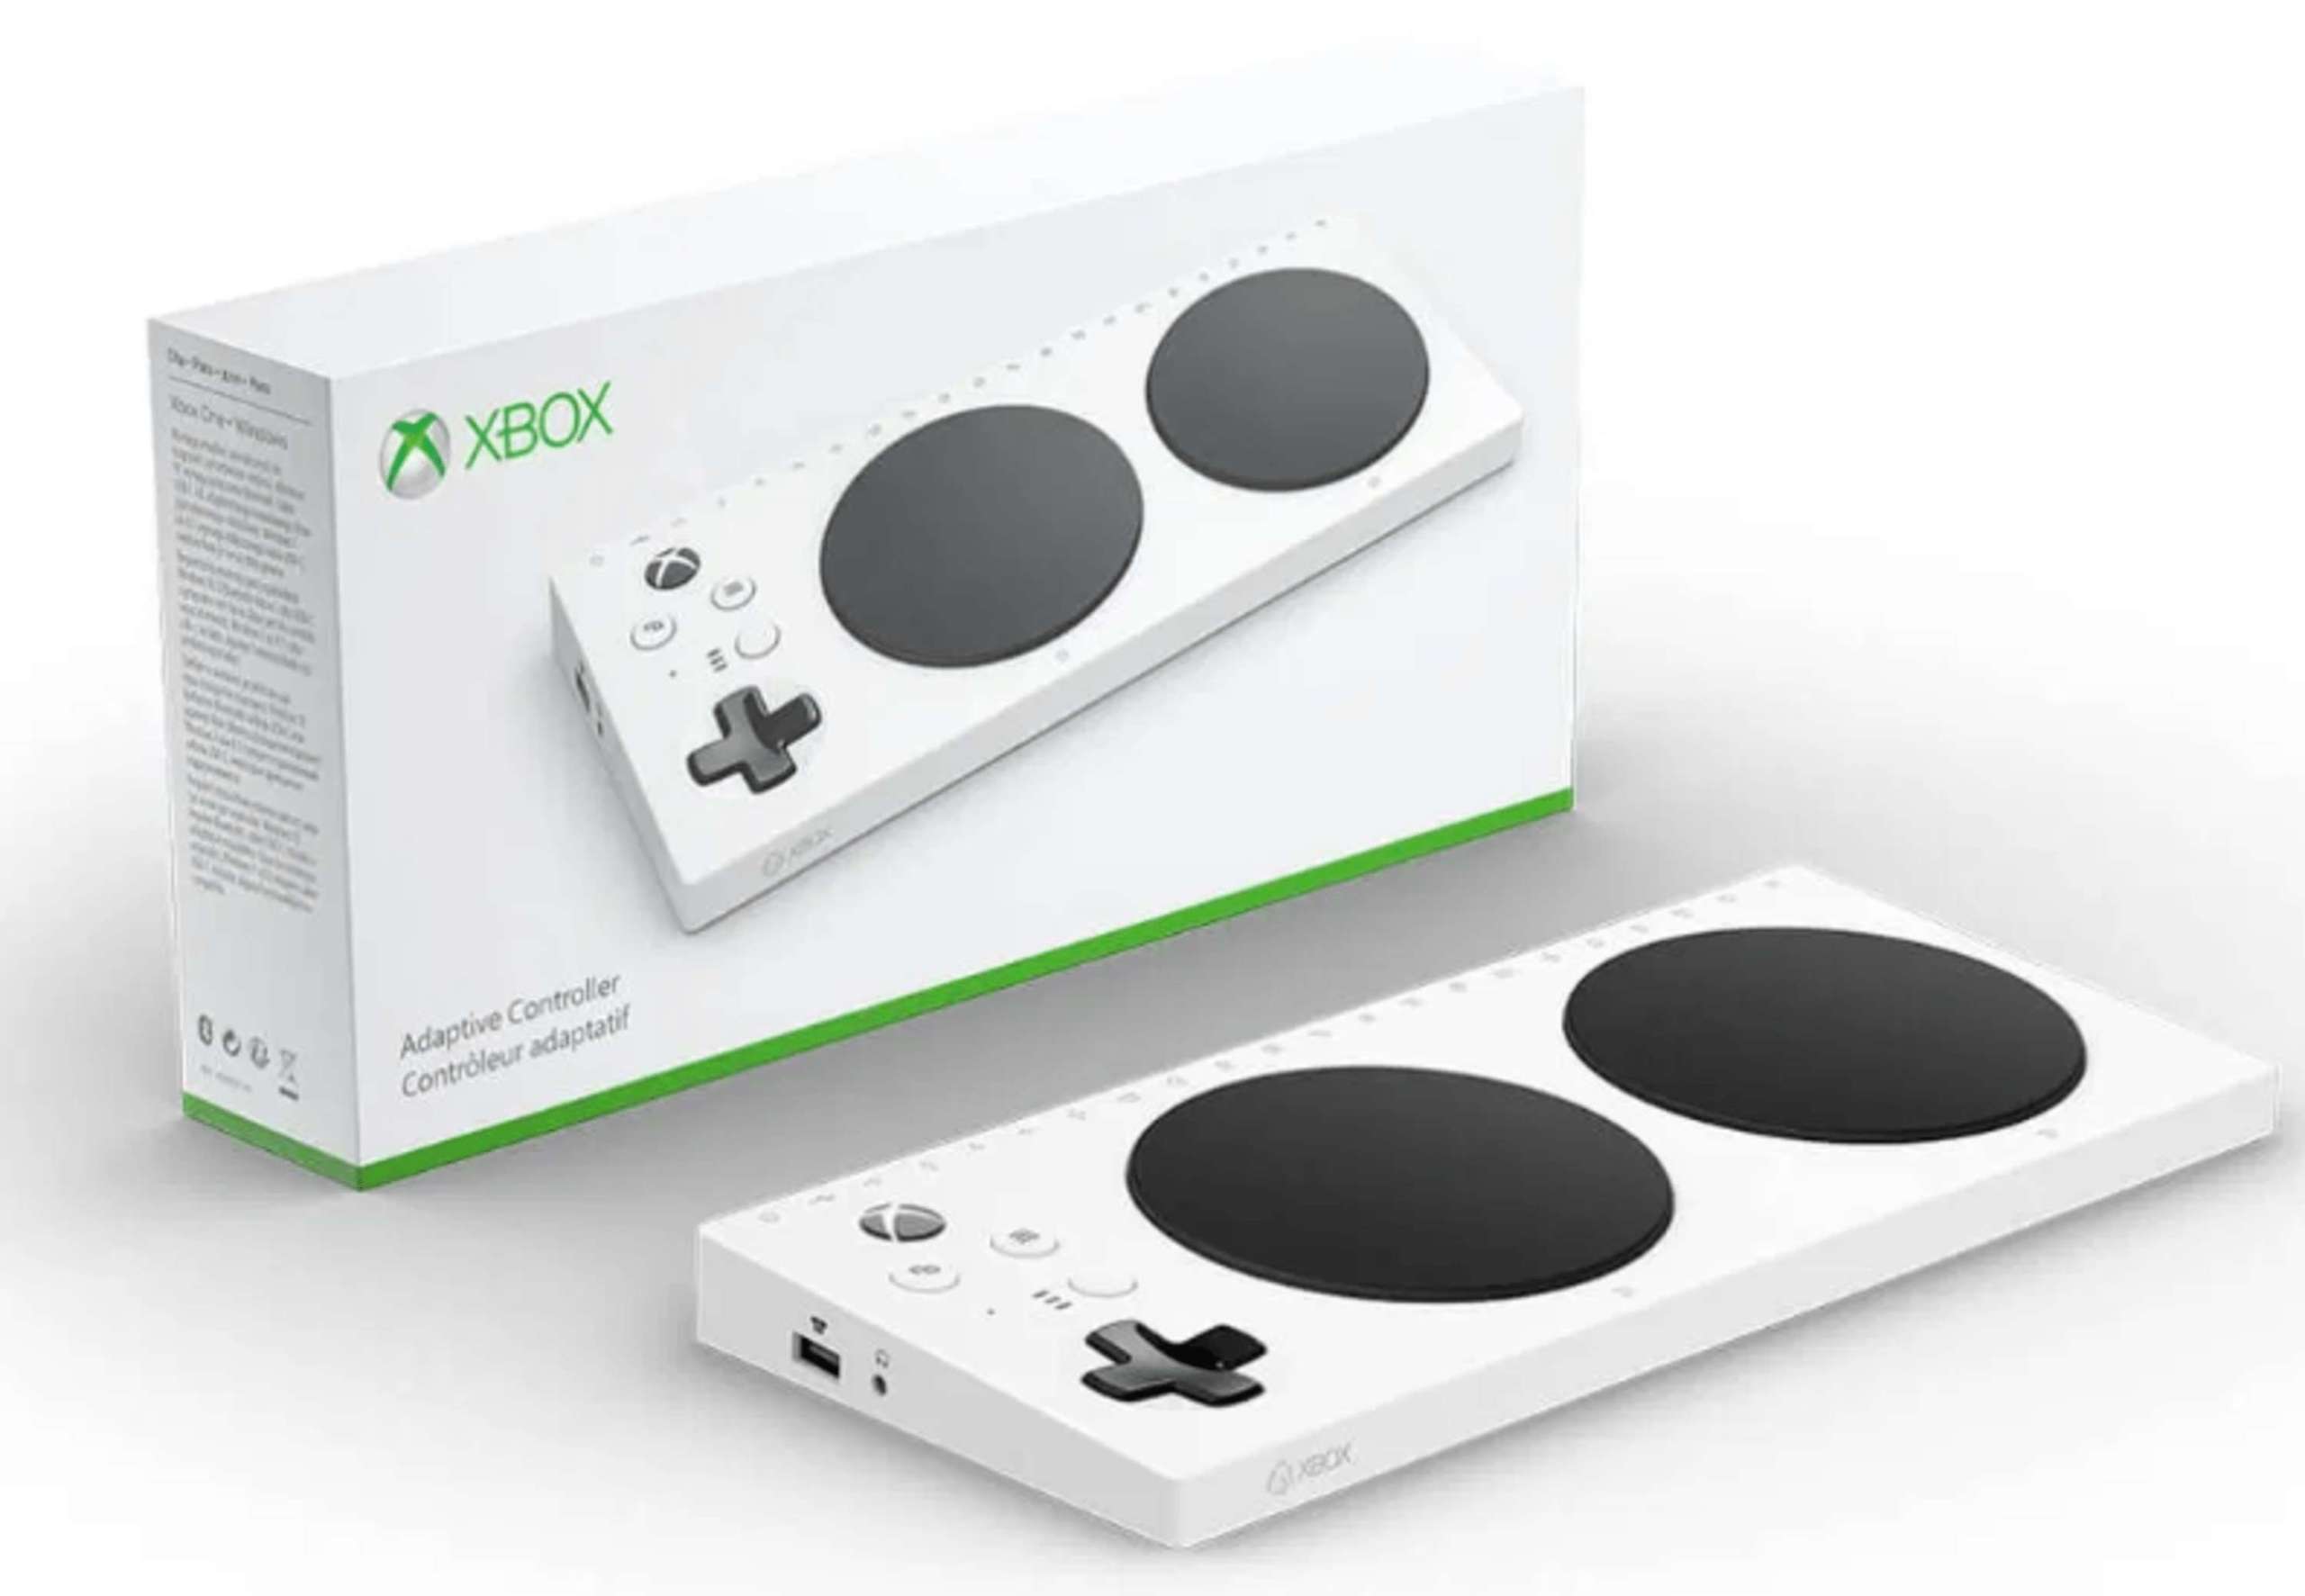 Linux Will Soon Have Support For The Microsoft Xbox Adaptive Controller